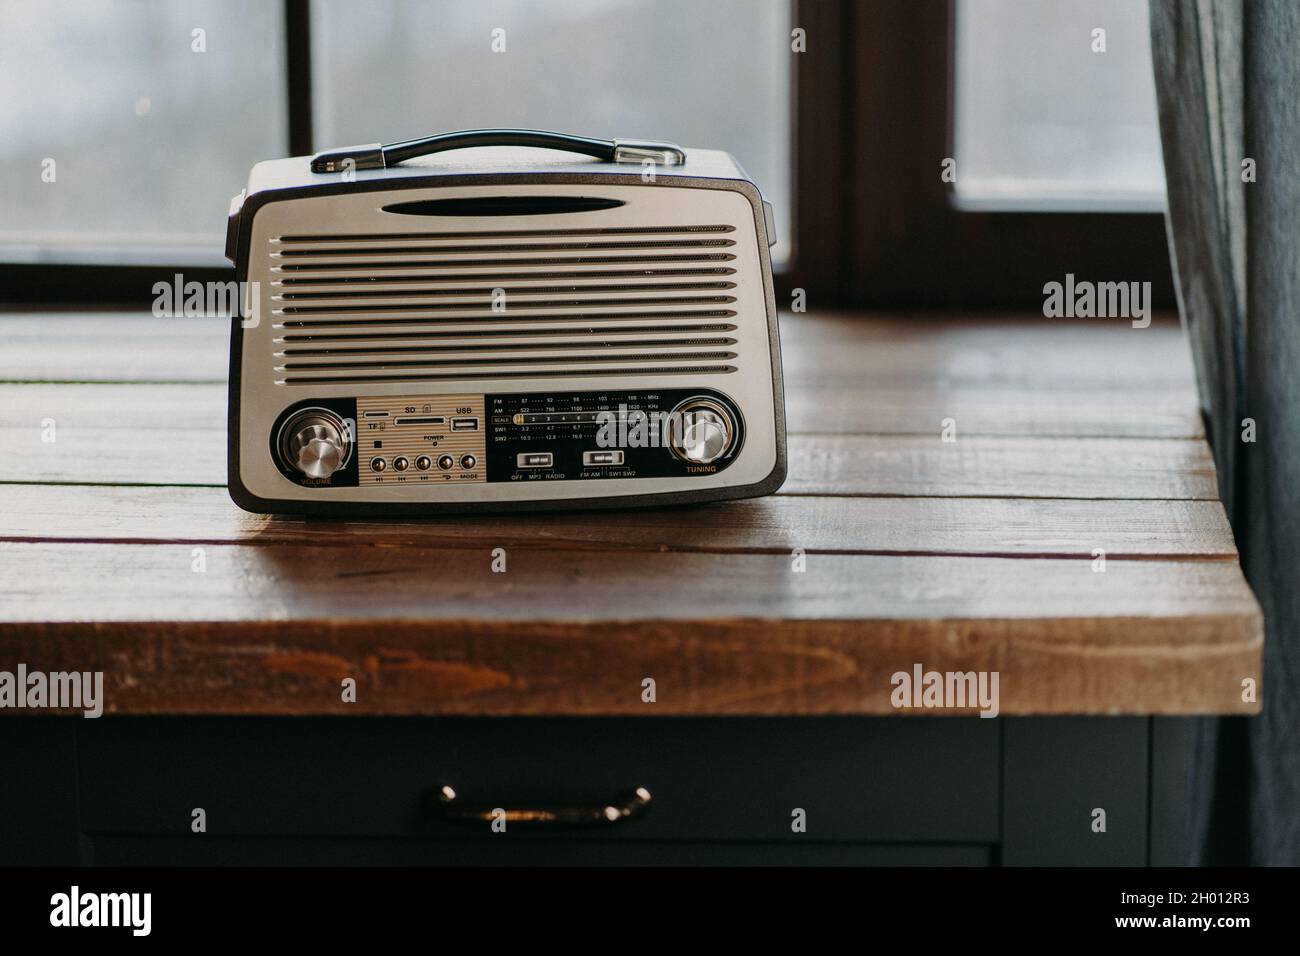 https://c8.alamy.com/comp/2H012R3/retro-vintage-radio-on-wooden-table-surface-near-window-back-to-80s-music-nostalgia-and-old-technology-concept-antique-recorder-2H012R3.jpg